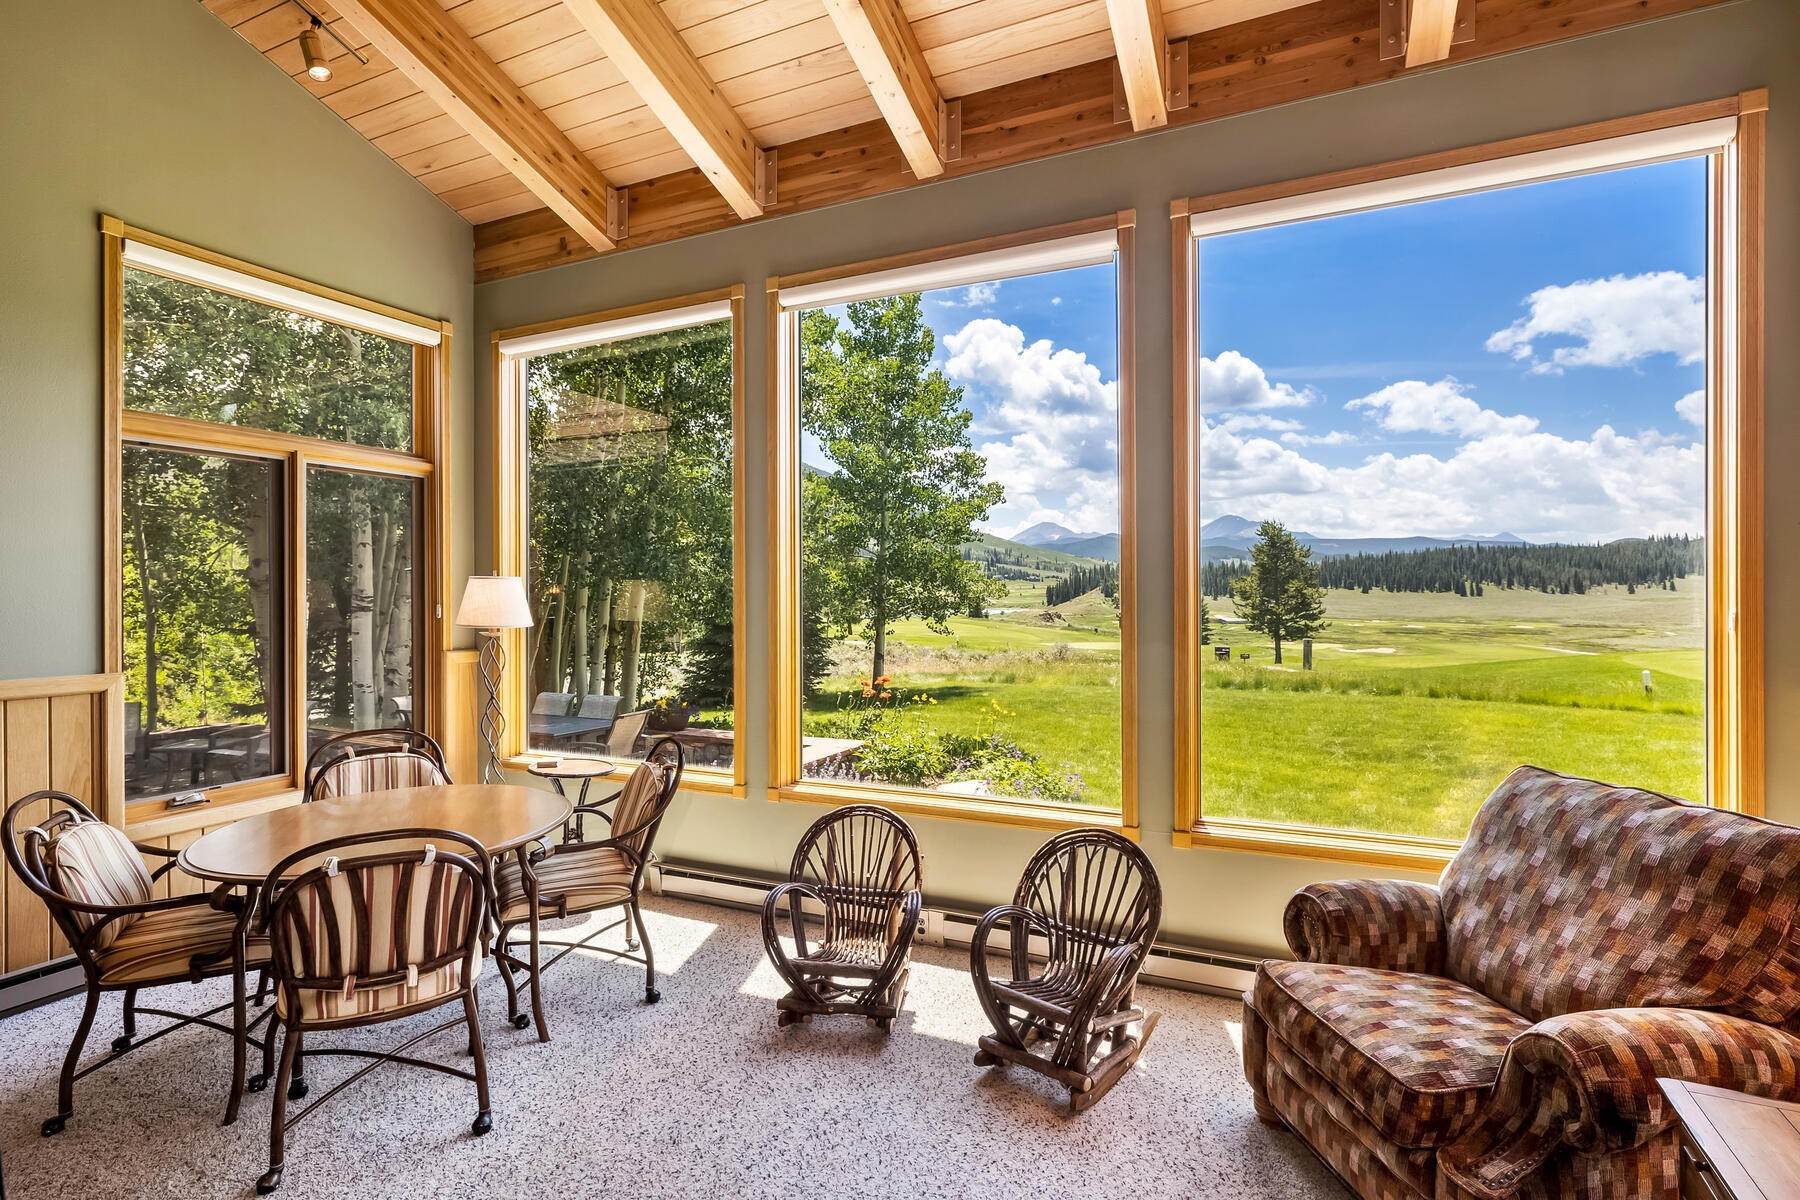 Single Family Homes for Active at Golf Course Legacy Property! 272 Penstemon Road Keystone, Colorado 80435 United States